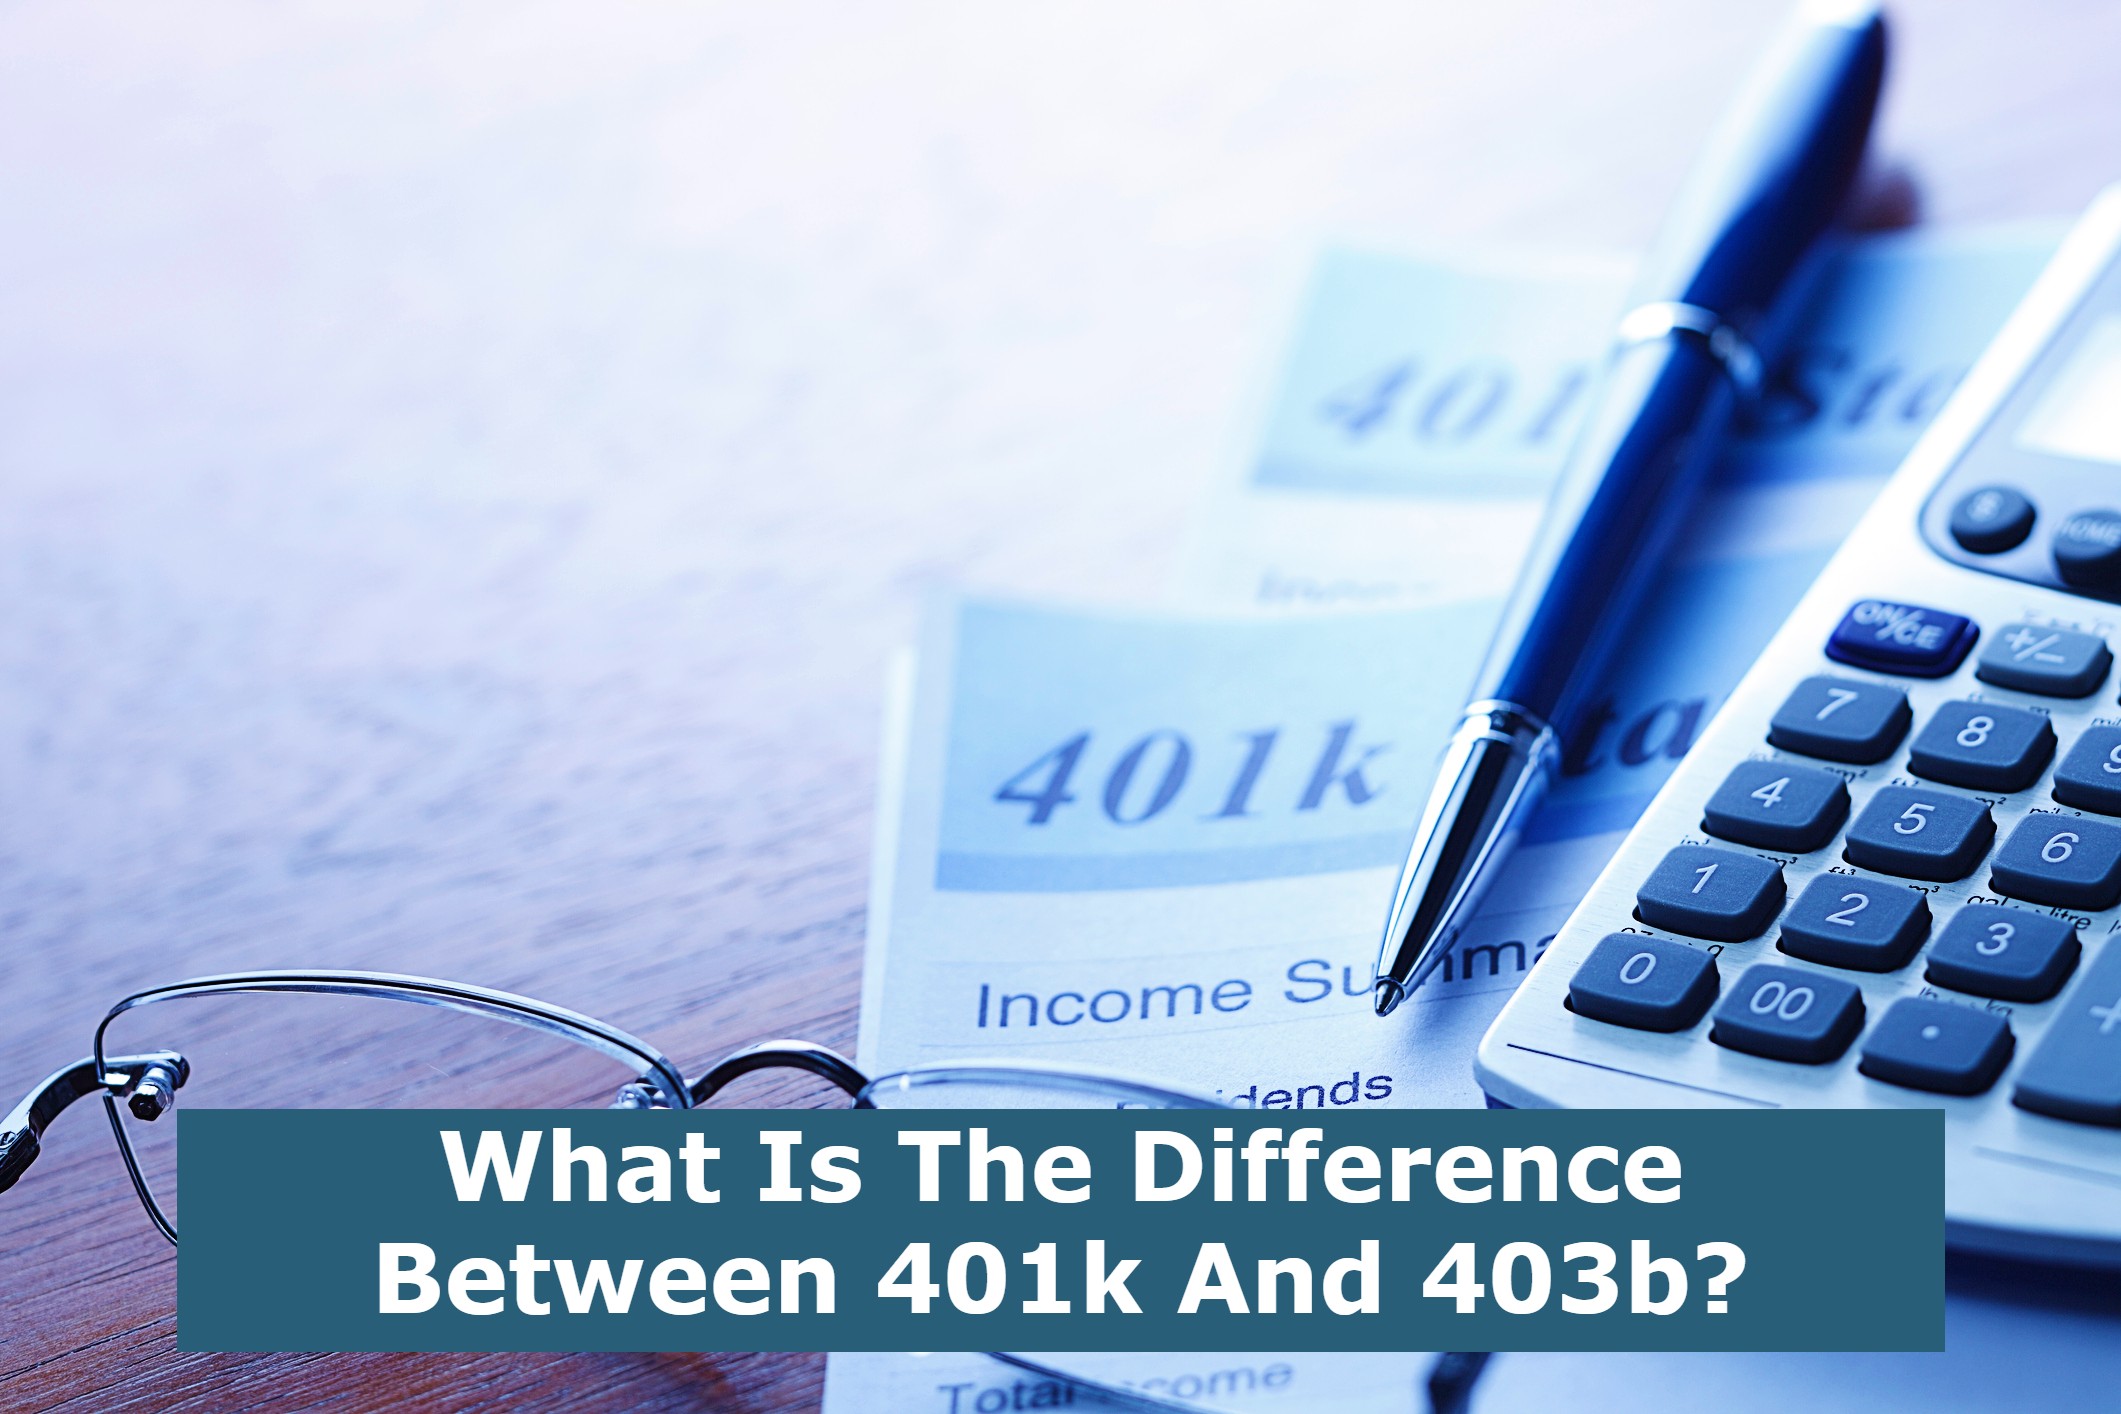 What Is The Difference Between 401k And 403b?